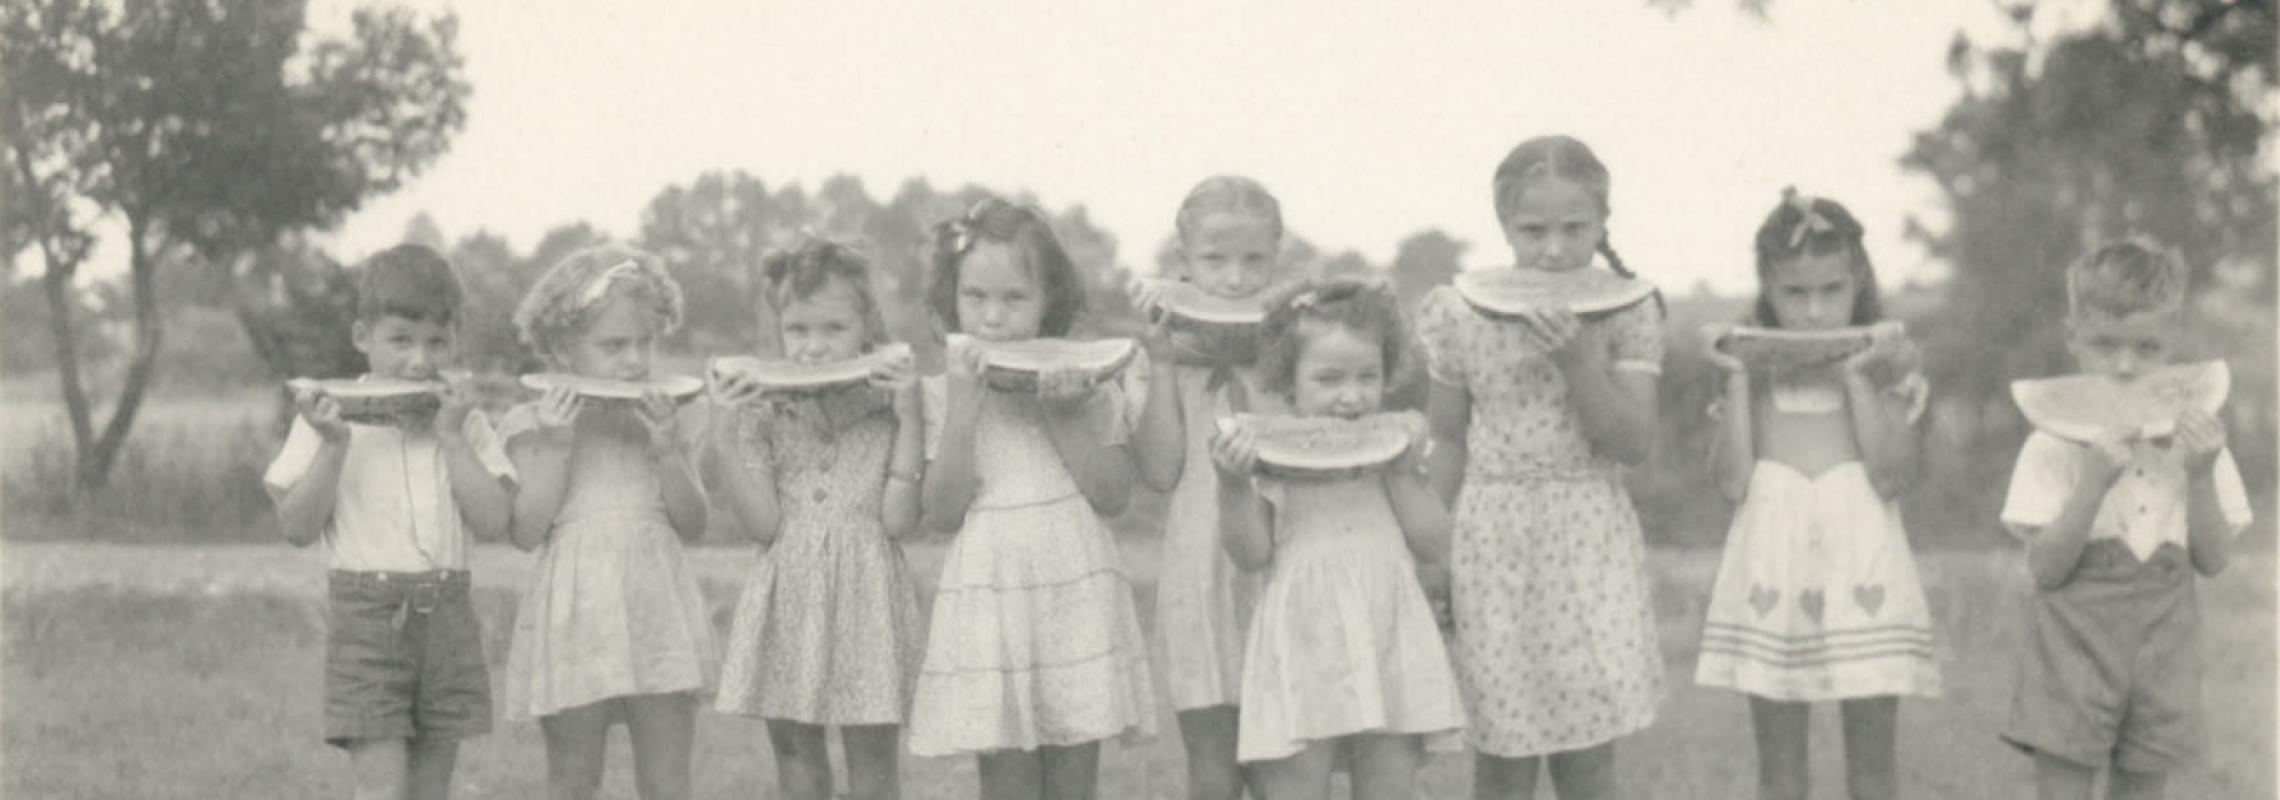 Photograph of Children Eating Watermelon in 1942